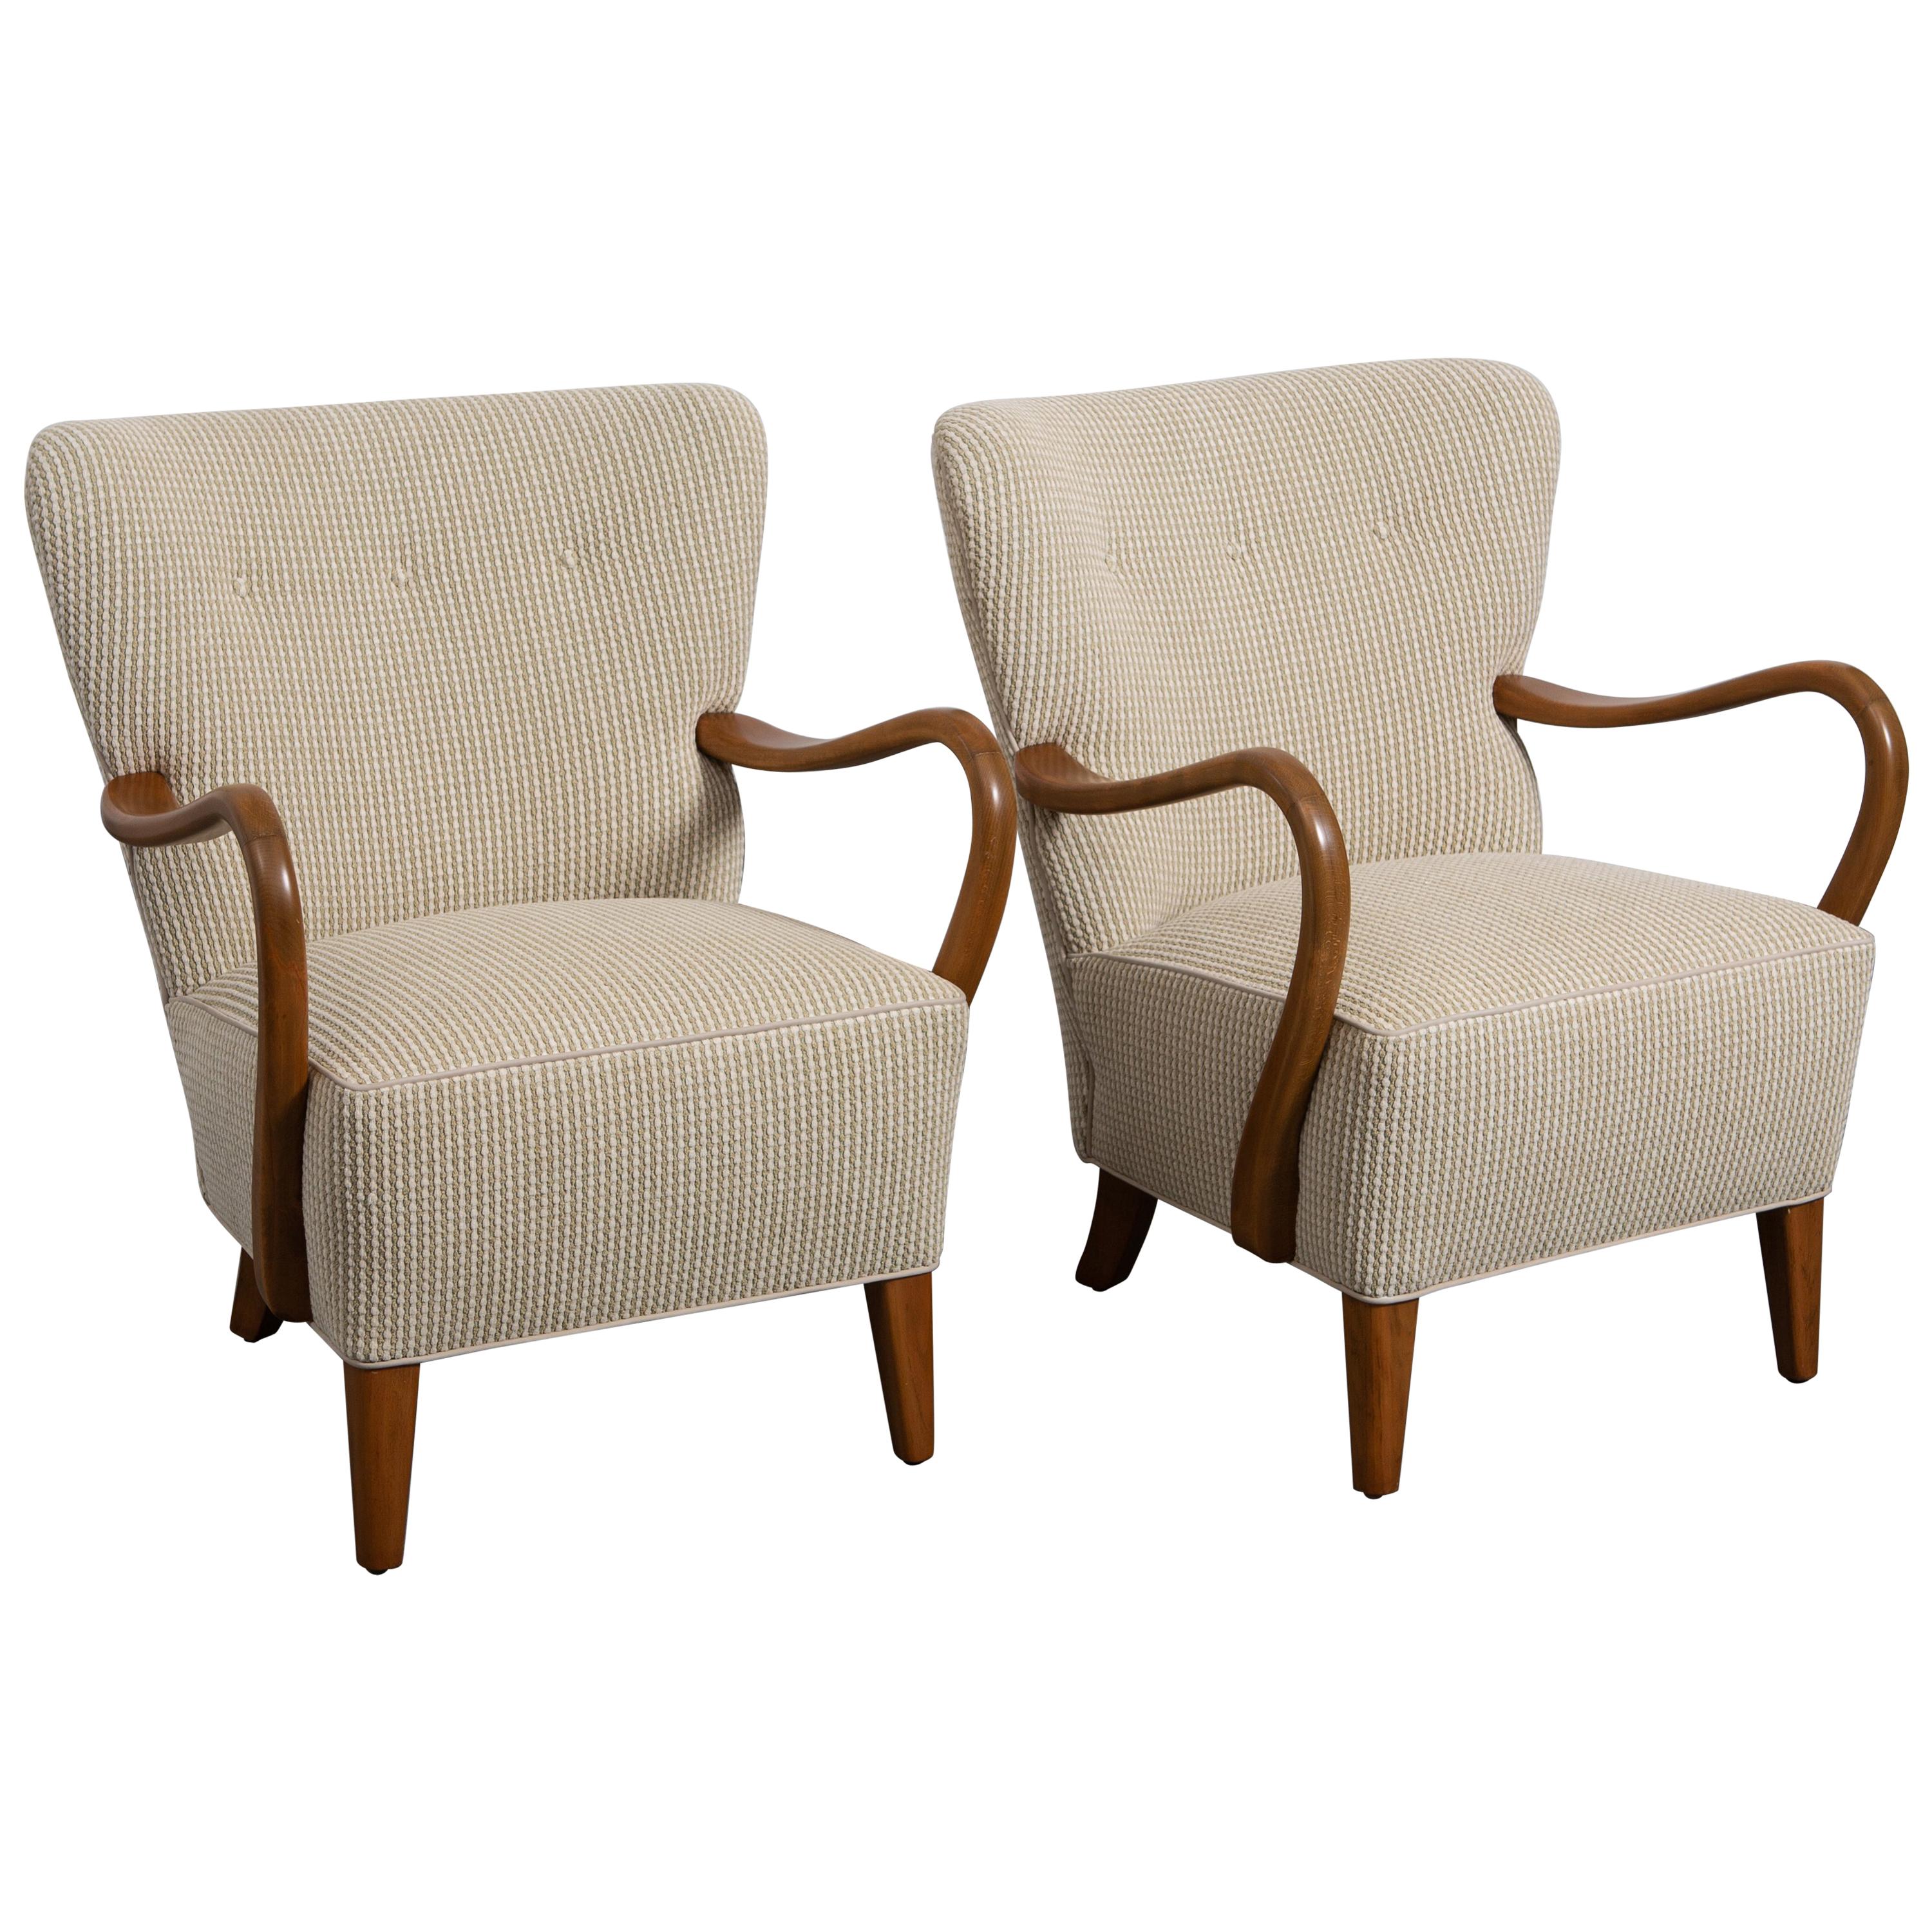 Pair of Midcentury Curved Wood Armchairs